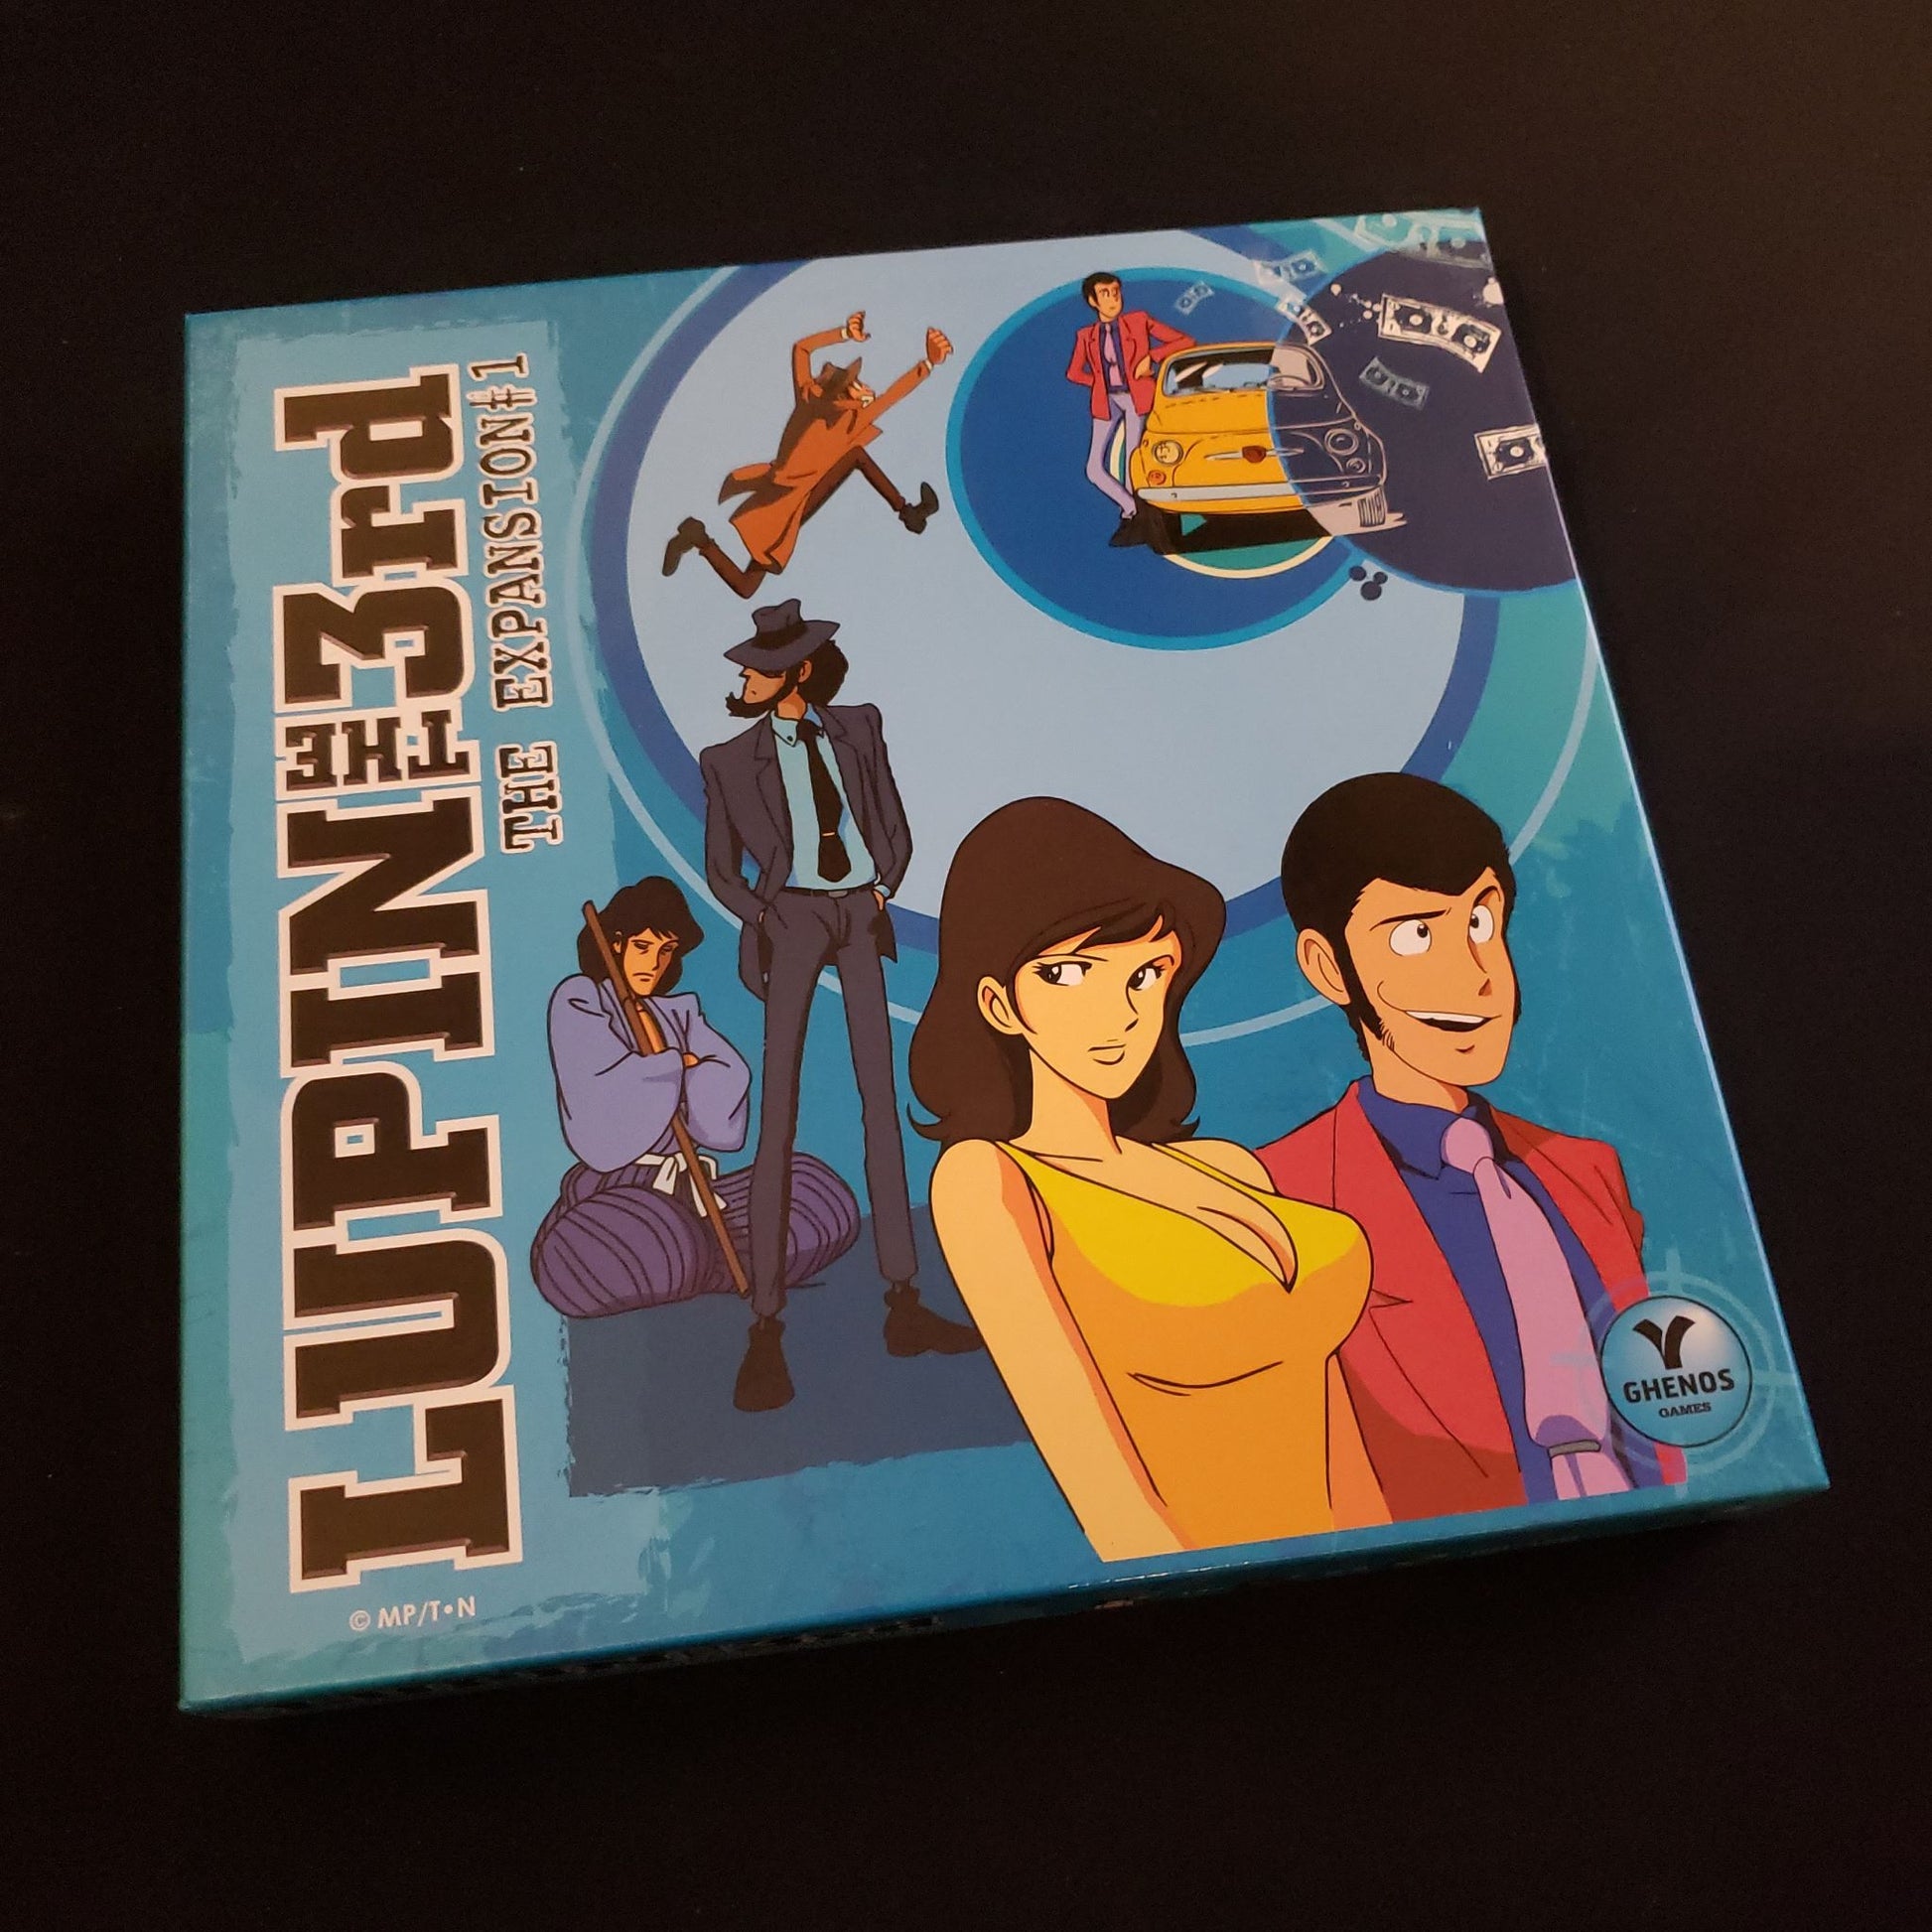 Lupin the Third The Board Game: Expansion #1 - front cover of box